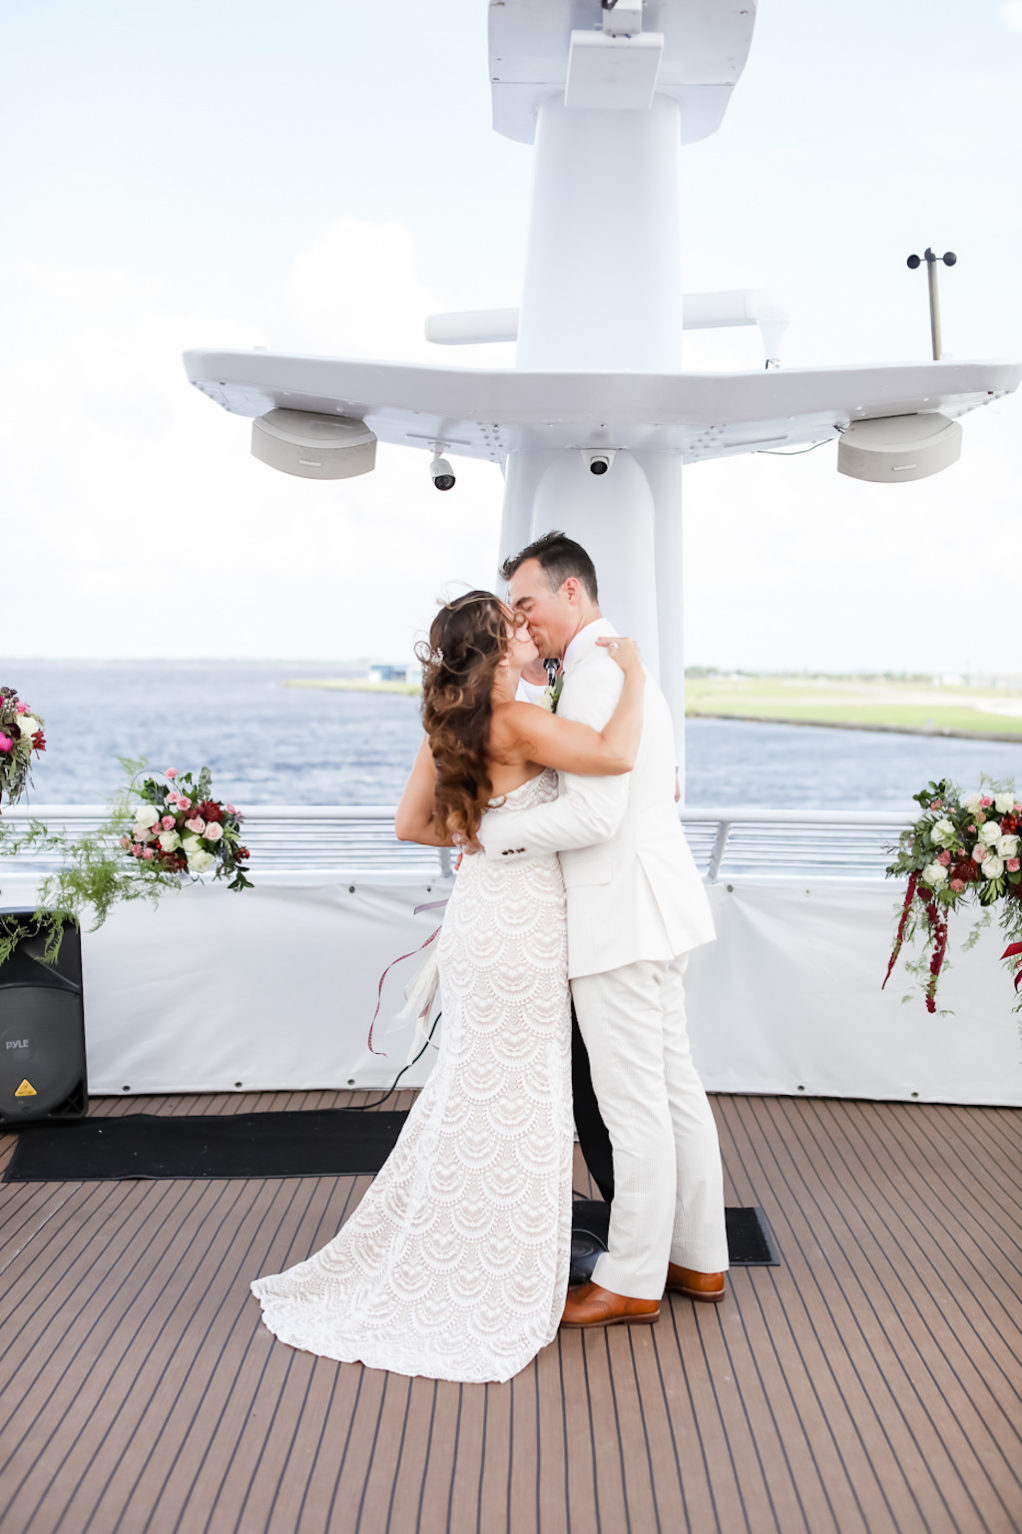 Florida Bride and Groom Exchanging First Kiss During Wedding Ceremony Portrait | Tampa Bay Wedding Photographer Lifelong Photography Studio | Clearwater Beach Waterfront Wedding Venue Yacht Starship